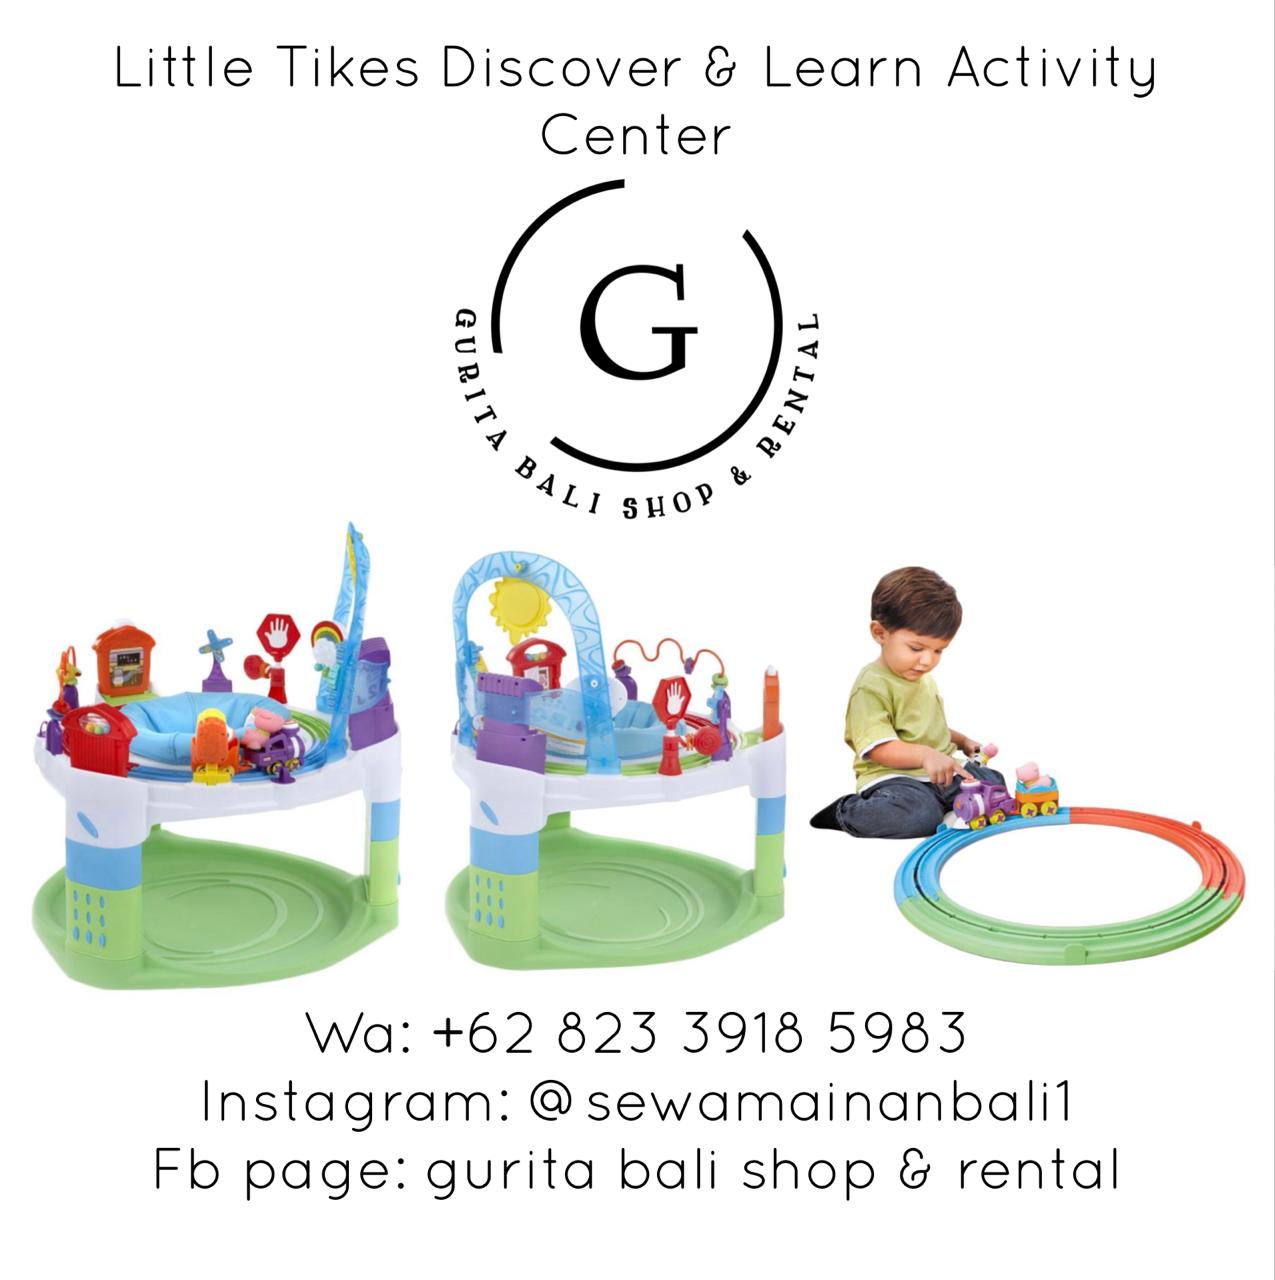 LITTLE TIKES DISCOVER  & LEARN ACTIVITY CENTER